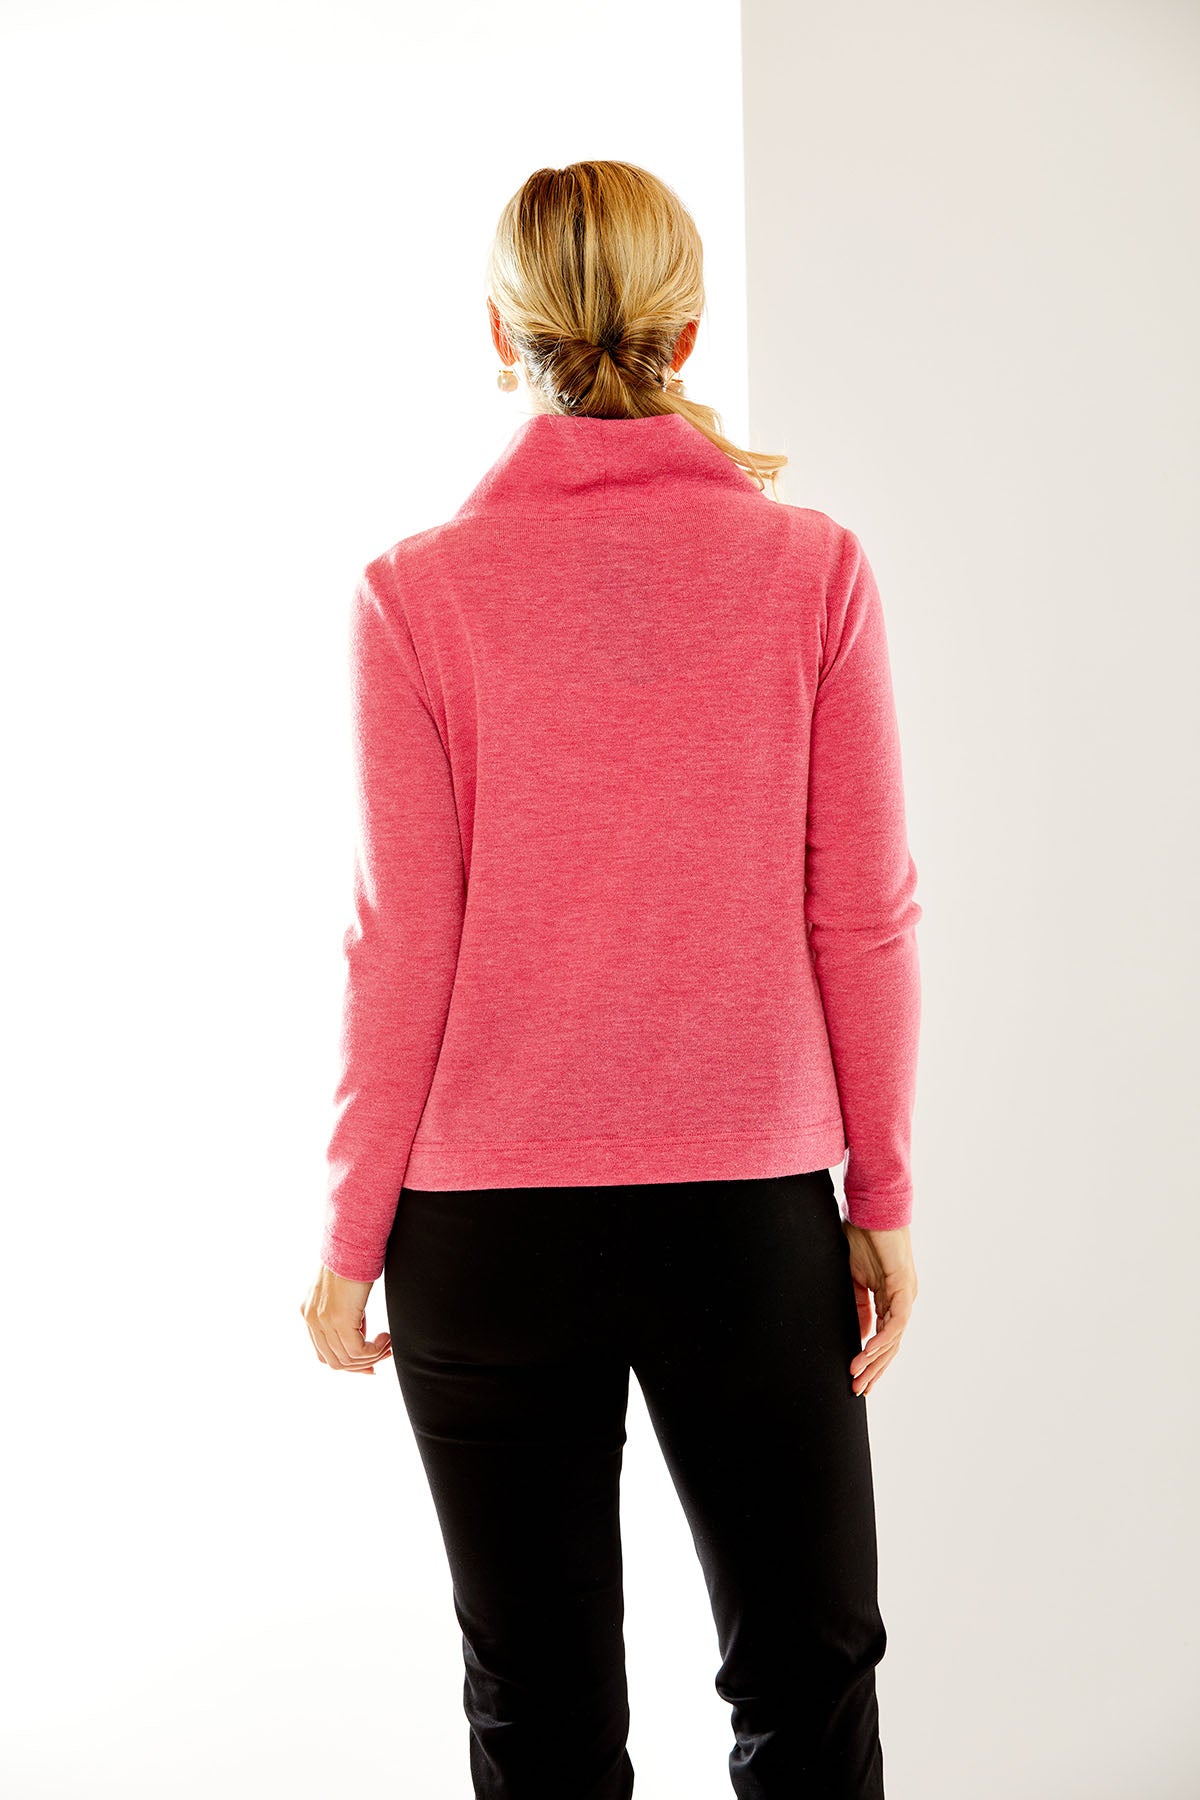 Woman in pink sweater